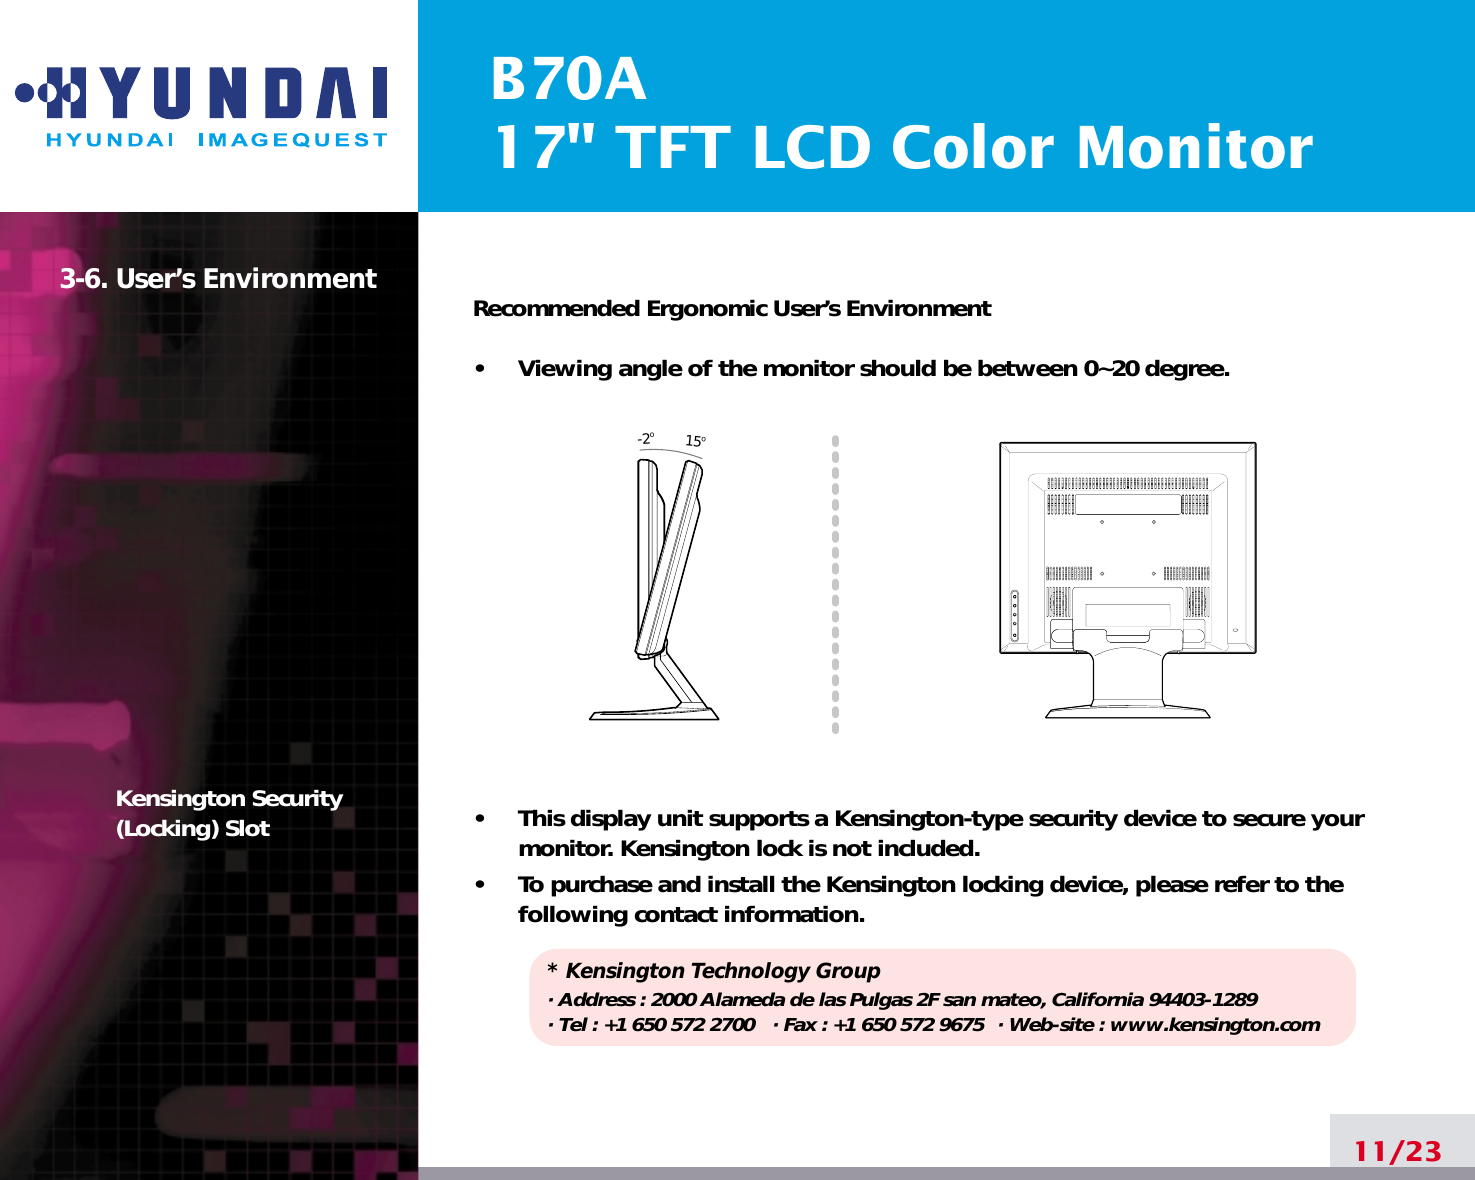 B70A17&quot; TFT LCD Color Monitor3-6. User’s EnvironmentKensington Security(Locking) SlotRecommended Ergonomic User’s Environment•     Viewing angle of the monitor should be between 0~20 degree.•     This display unit supports a Kensington-type security device to secure yourmonitor. Kensington lock is not included.•     To purchase and install the Kensington locking device, please refer to thefollowing contact information.* Kensington Technology Group· Address : 2000 Alameda de las Pulgas 2F san mateo, California 94403-1289· Tel : +1 650 572 2700 · Fax : +1 650 572 9675 · Web-site : www.kensington.com11/2315o-2o